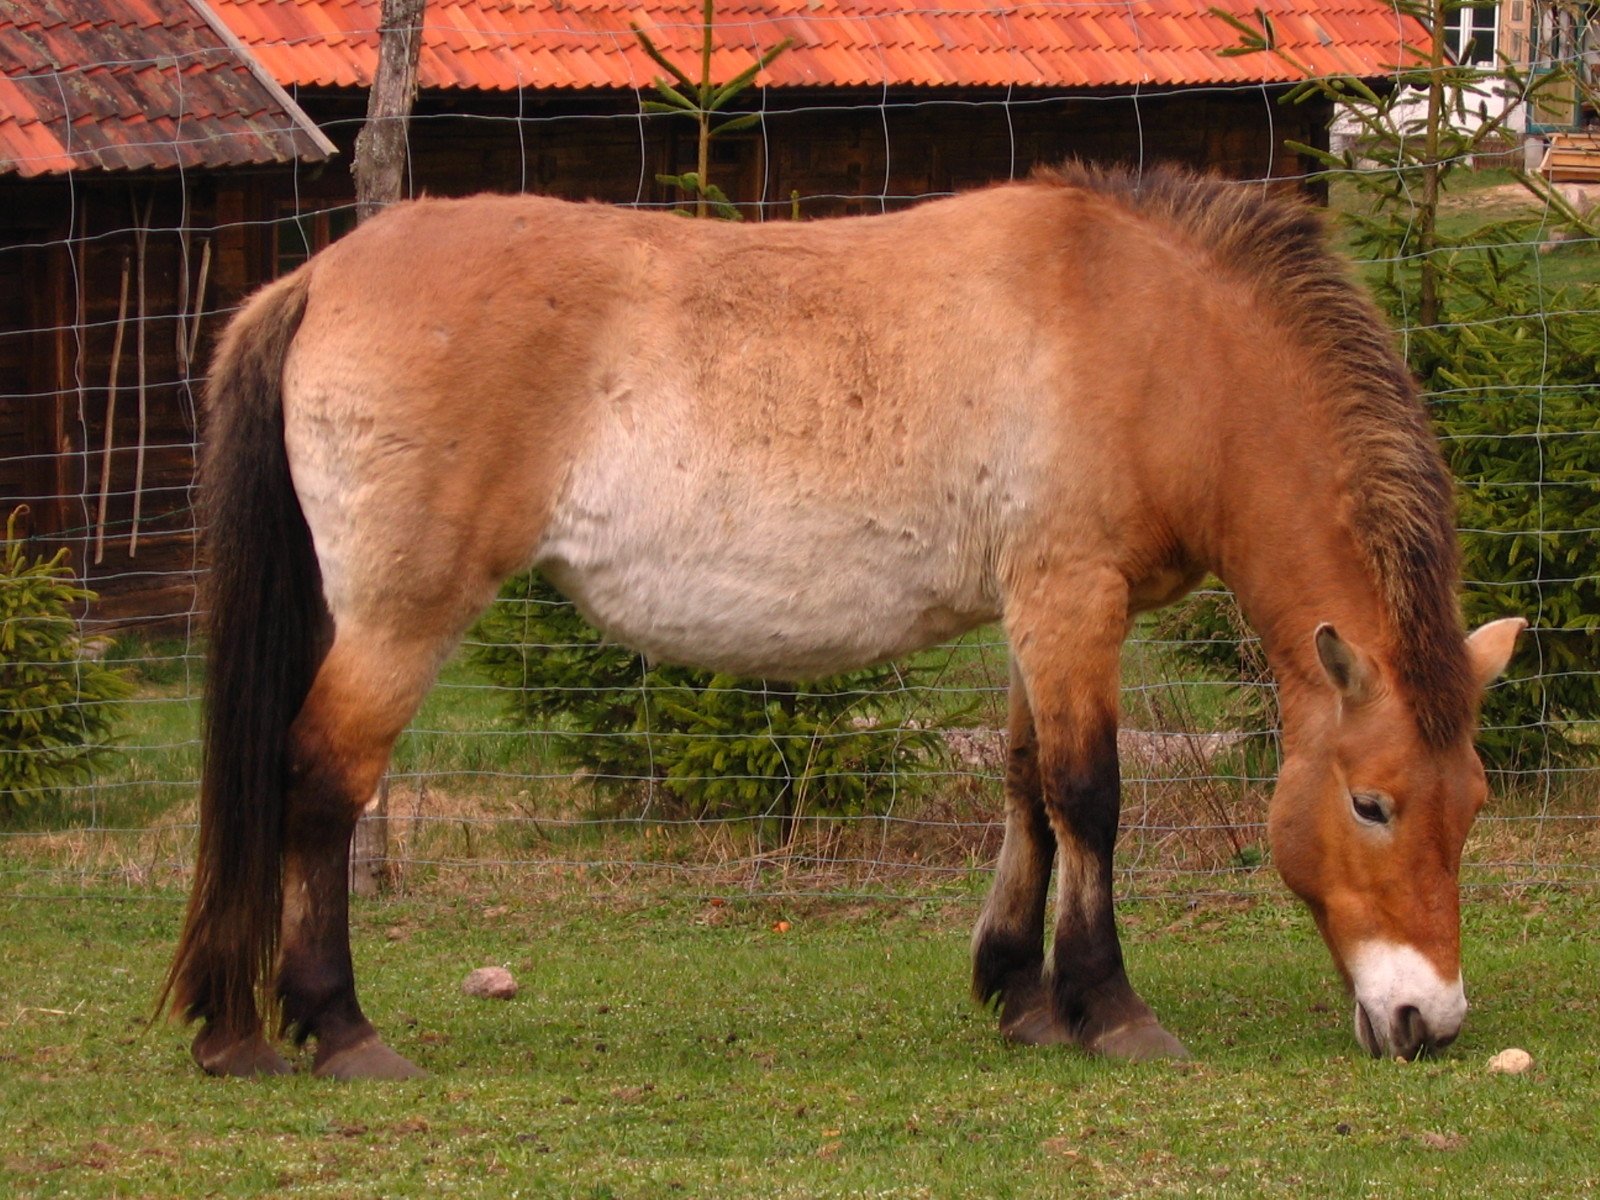 a horse grazing on grass next to a fence